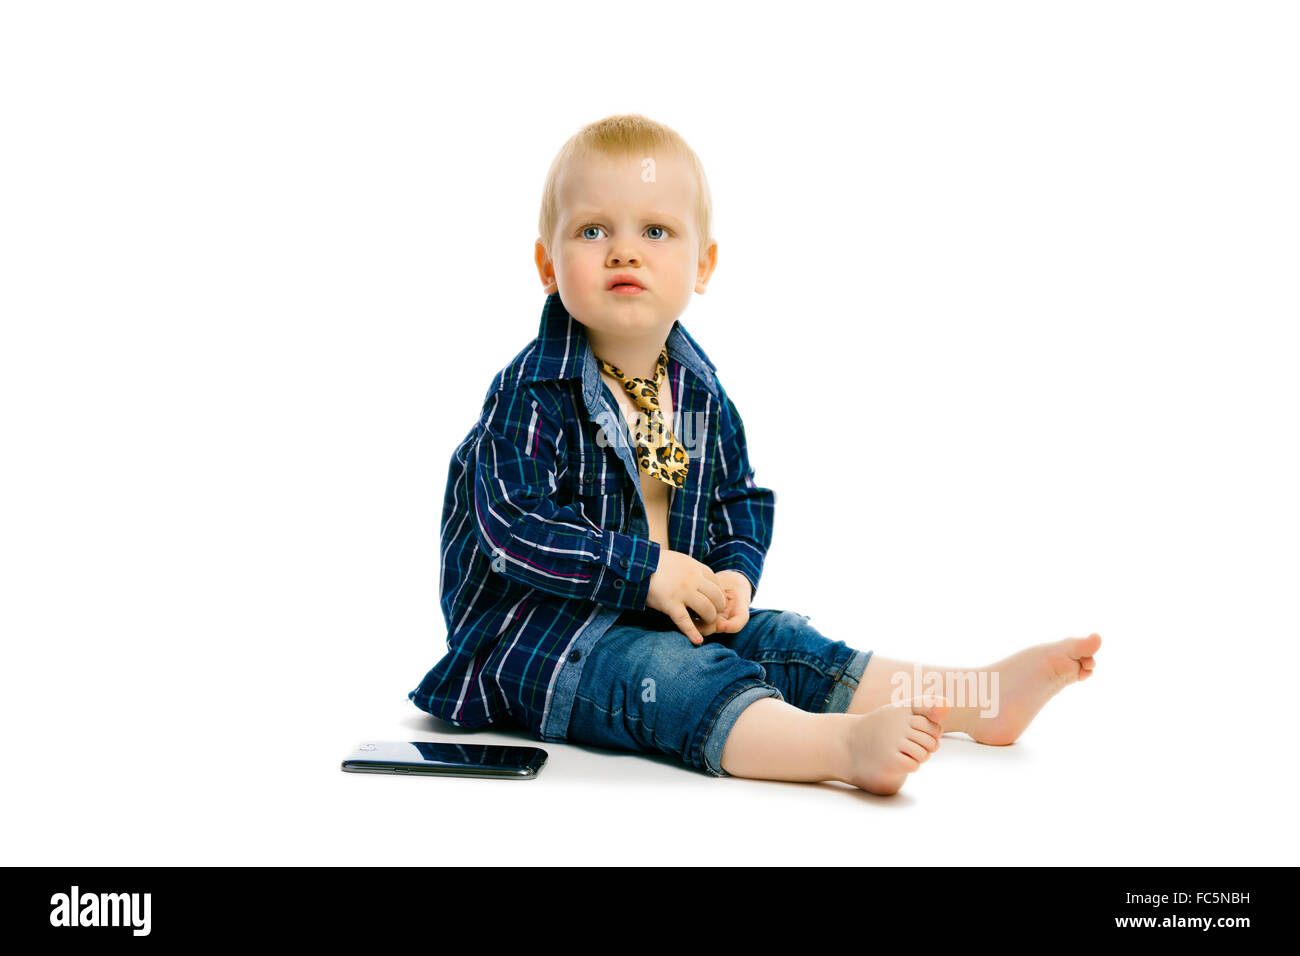 boy in a tie sitting on a white floor Stock Photo